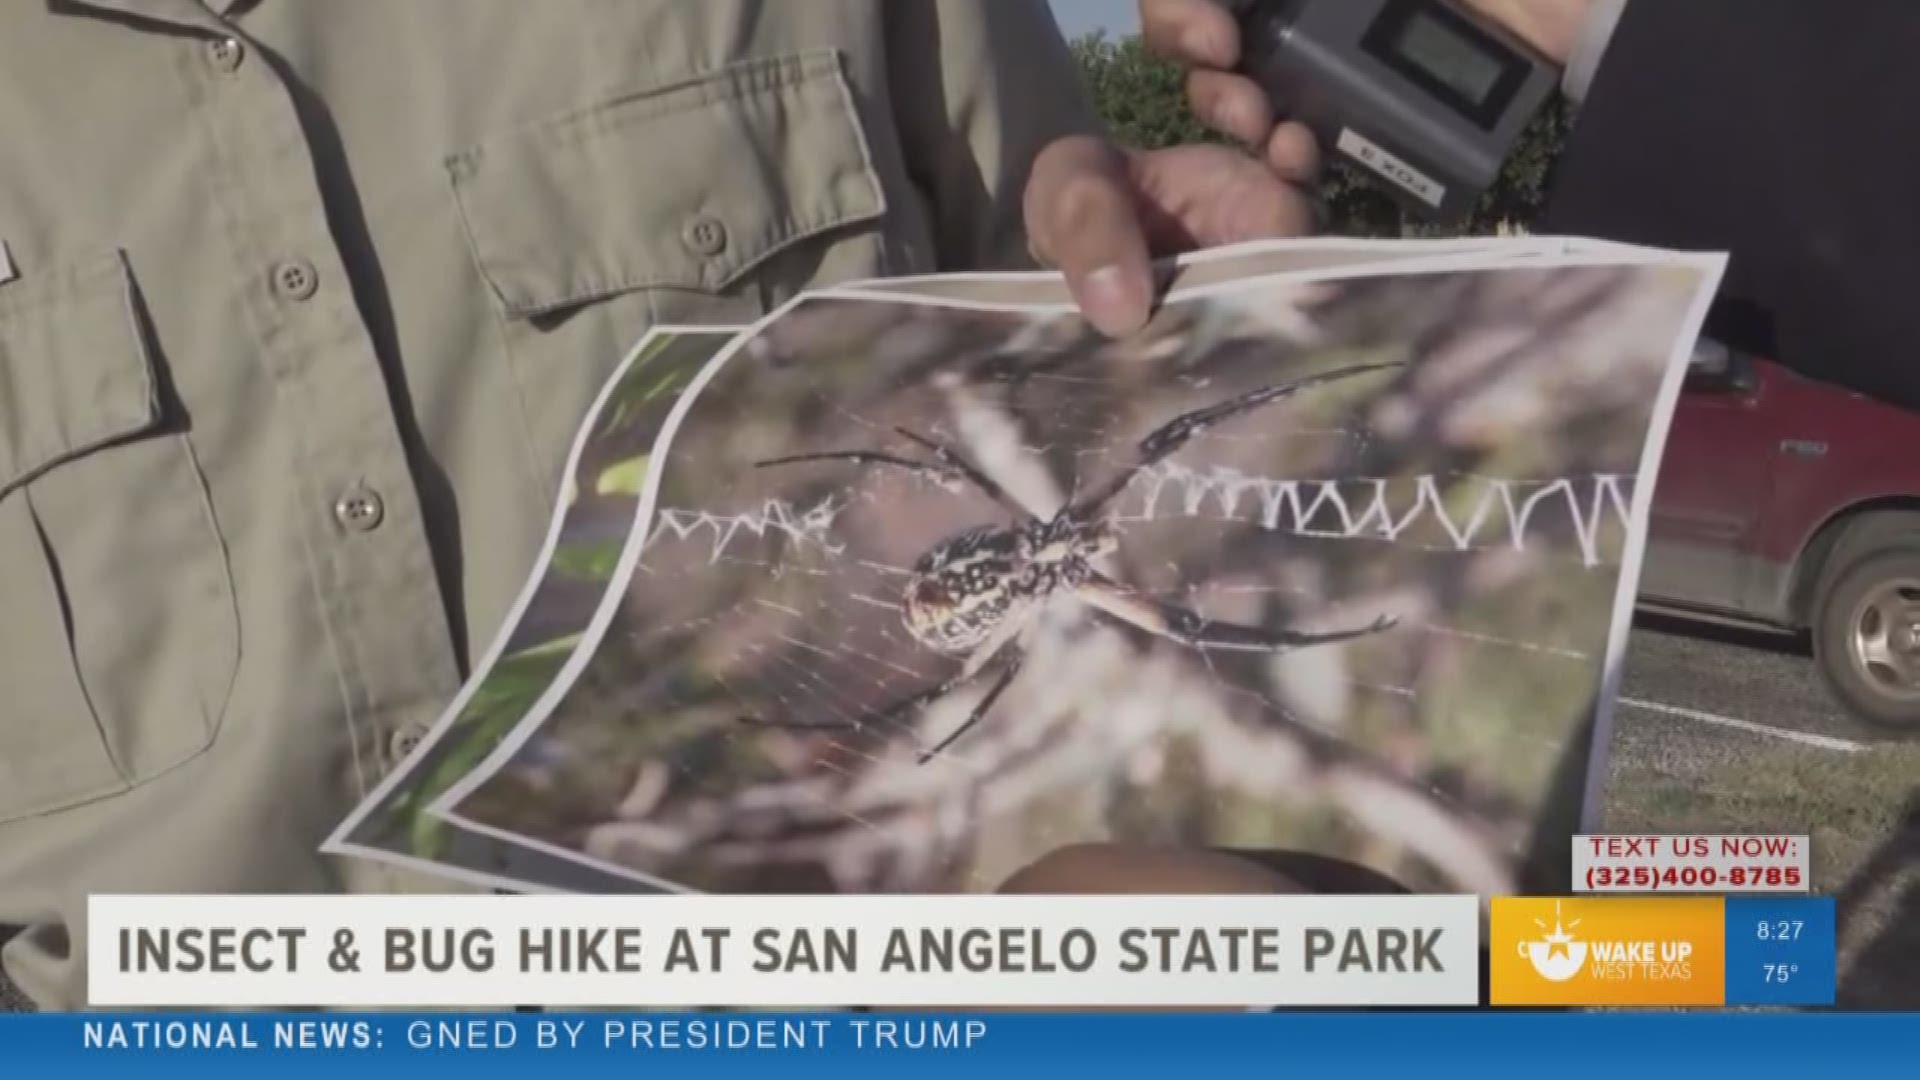 Our Malik Mingo spoke with the guide of the upcoming insect & bug hike at the San Angelo State Park on August 24 at 9:30 a.m.